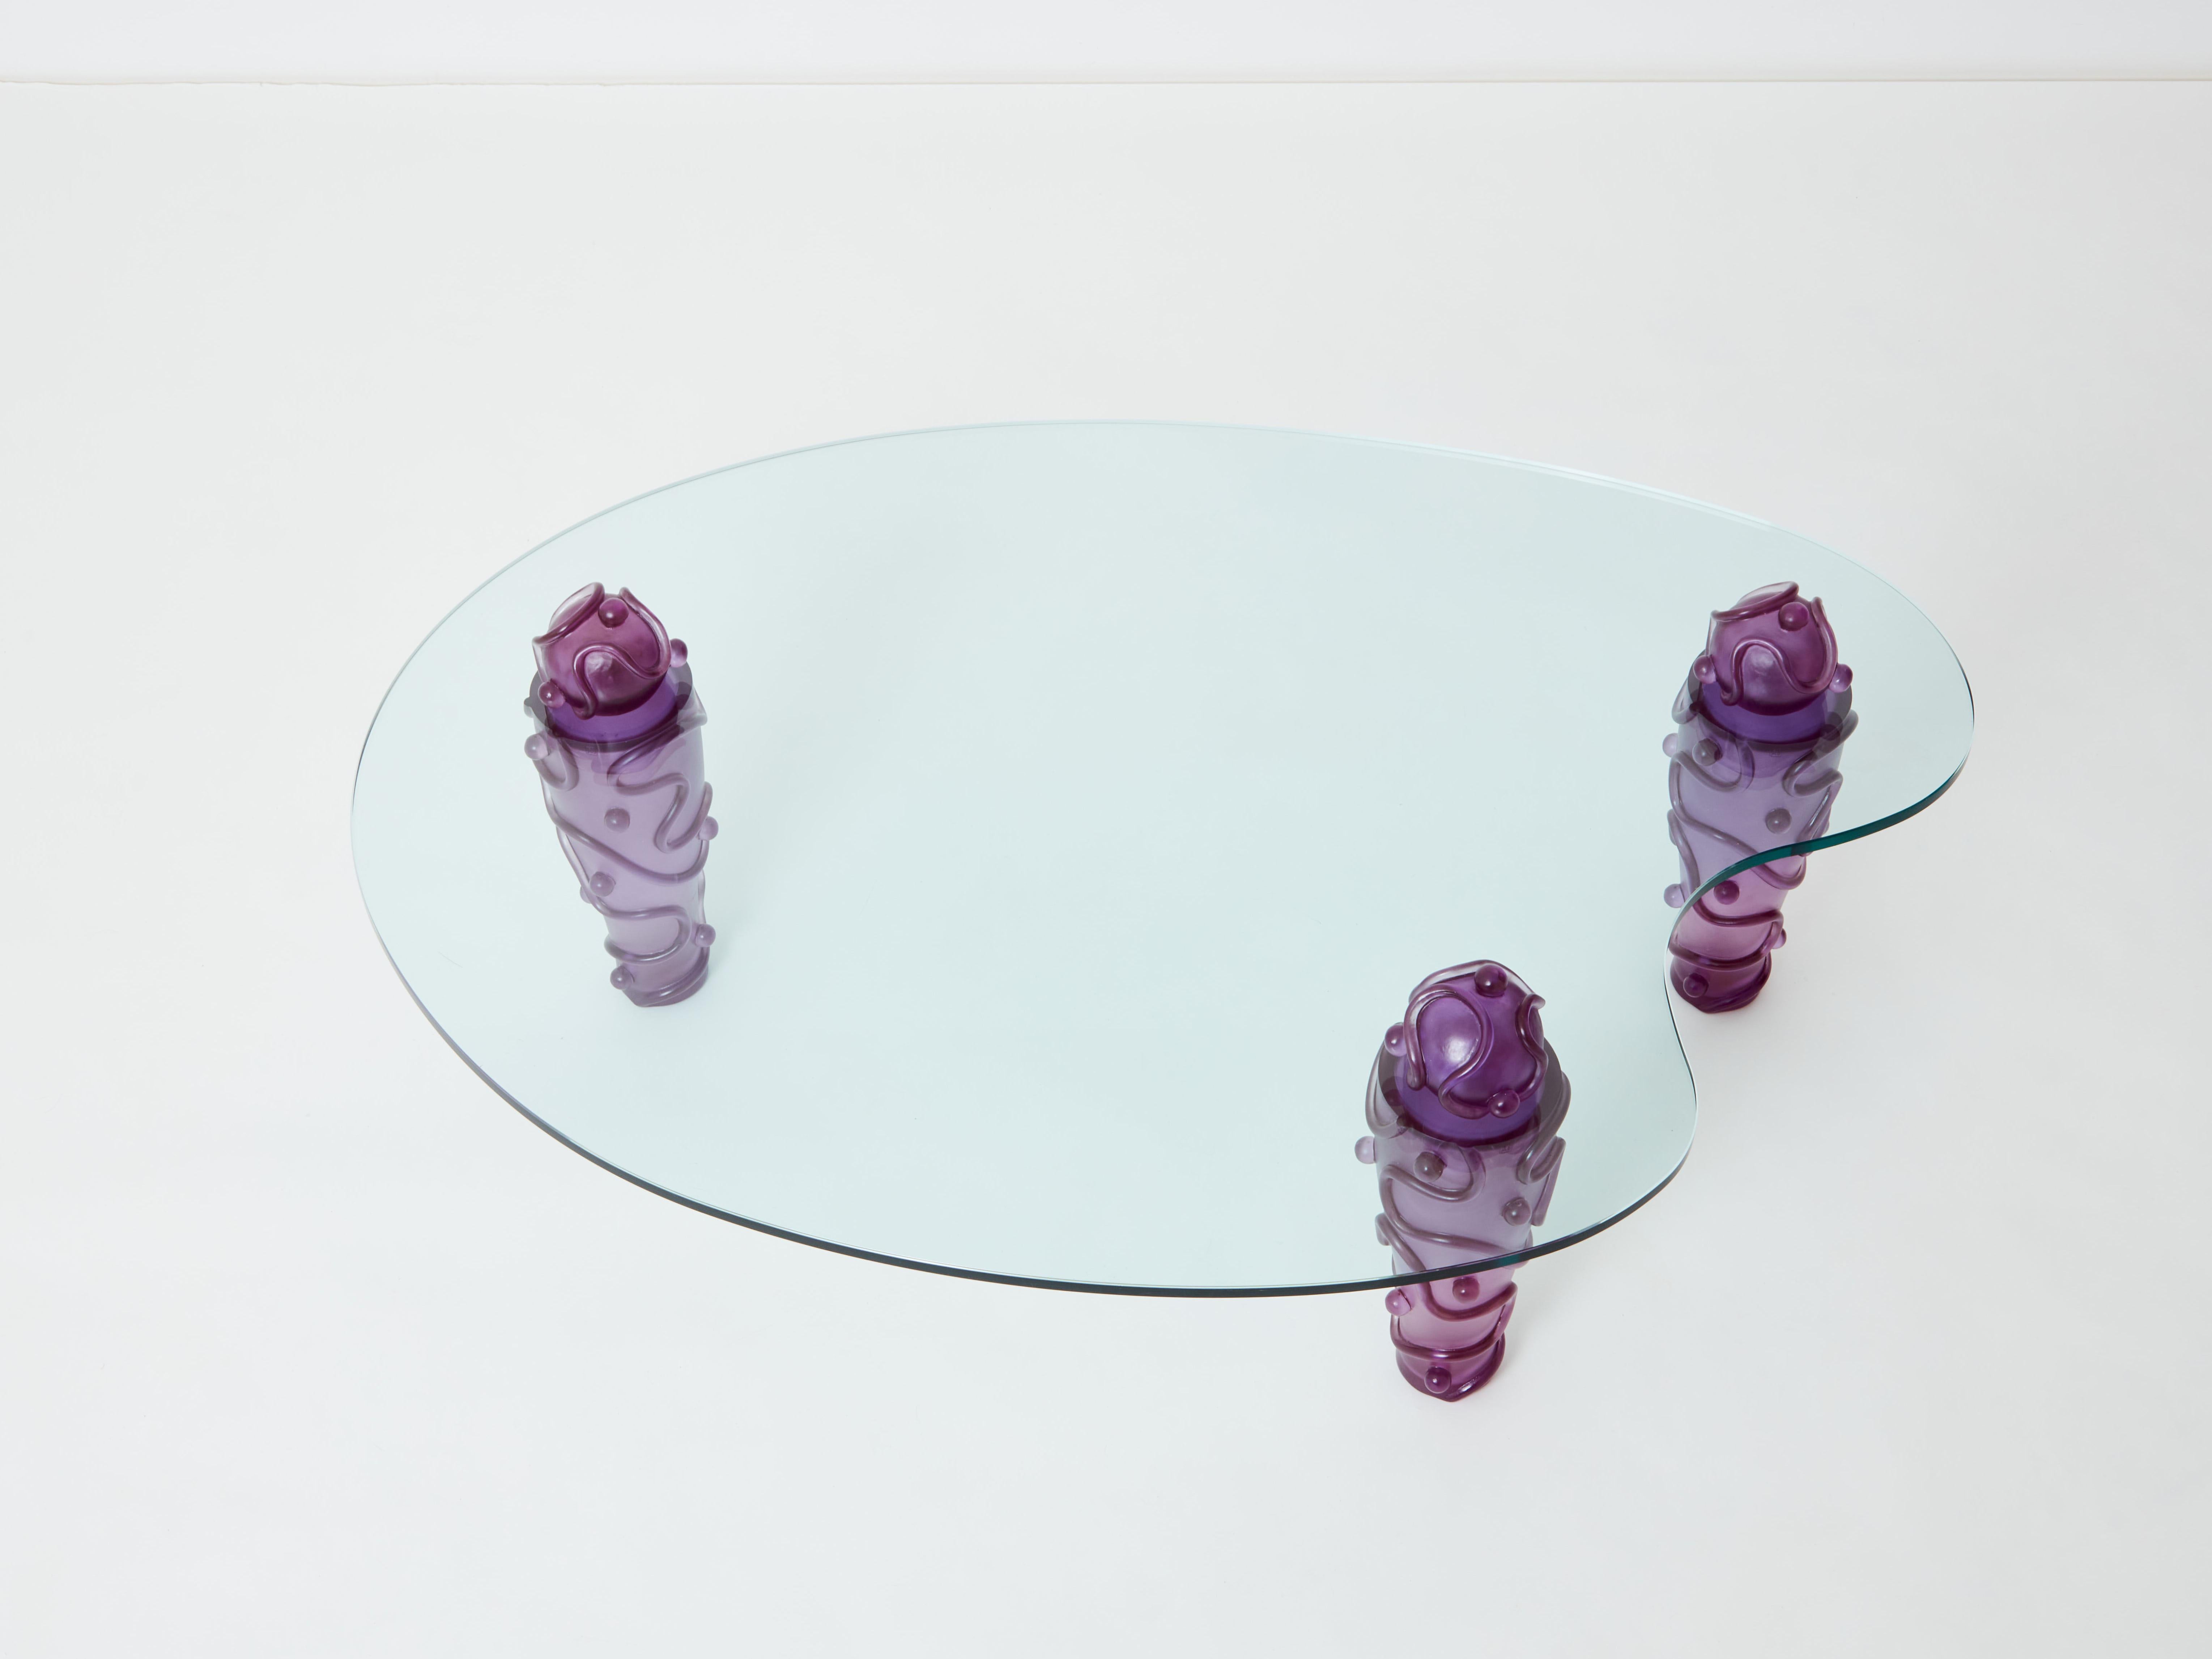 Cool deep purple colour and a fanciful design make this 1990s coffee table a statement piece, especially for those that believe passionate expressions of creativity go hand-in-hand with interior design. Elizabeth Garouste & Mattia Bonetti were a